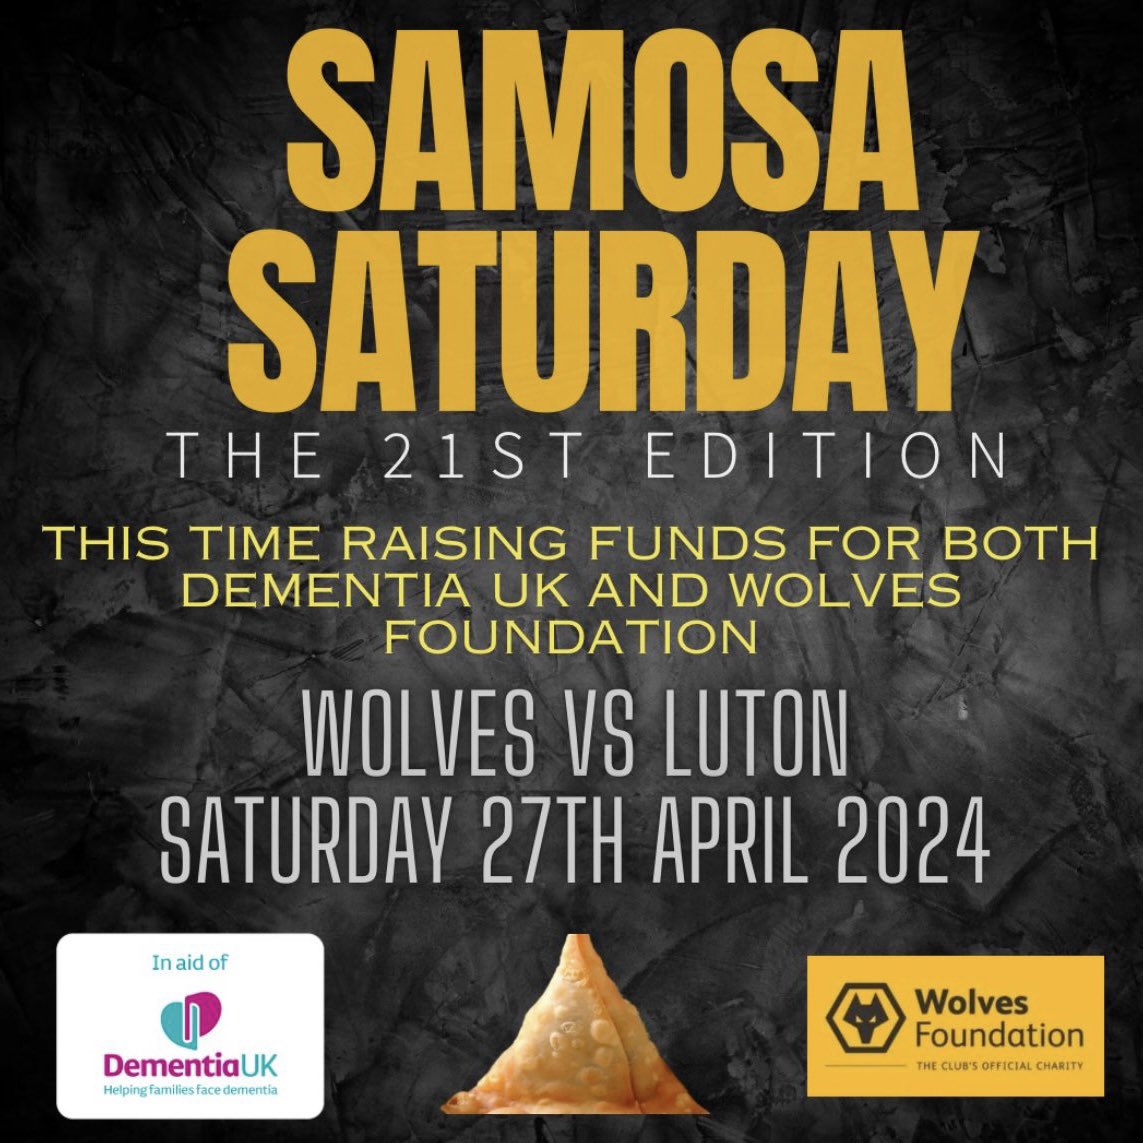 Last Saturday, @pedalsingh ran the London marathon. You can hear all about it on Wolverhampton Mornings with @Chris_WCR at around 10:30am today, as part of @1018wcrfm's efforts to raise awareness on dementia. And don't forget, Manny and co host Samosa Saturday 21 this Saturday!